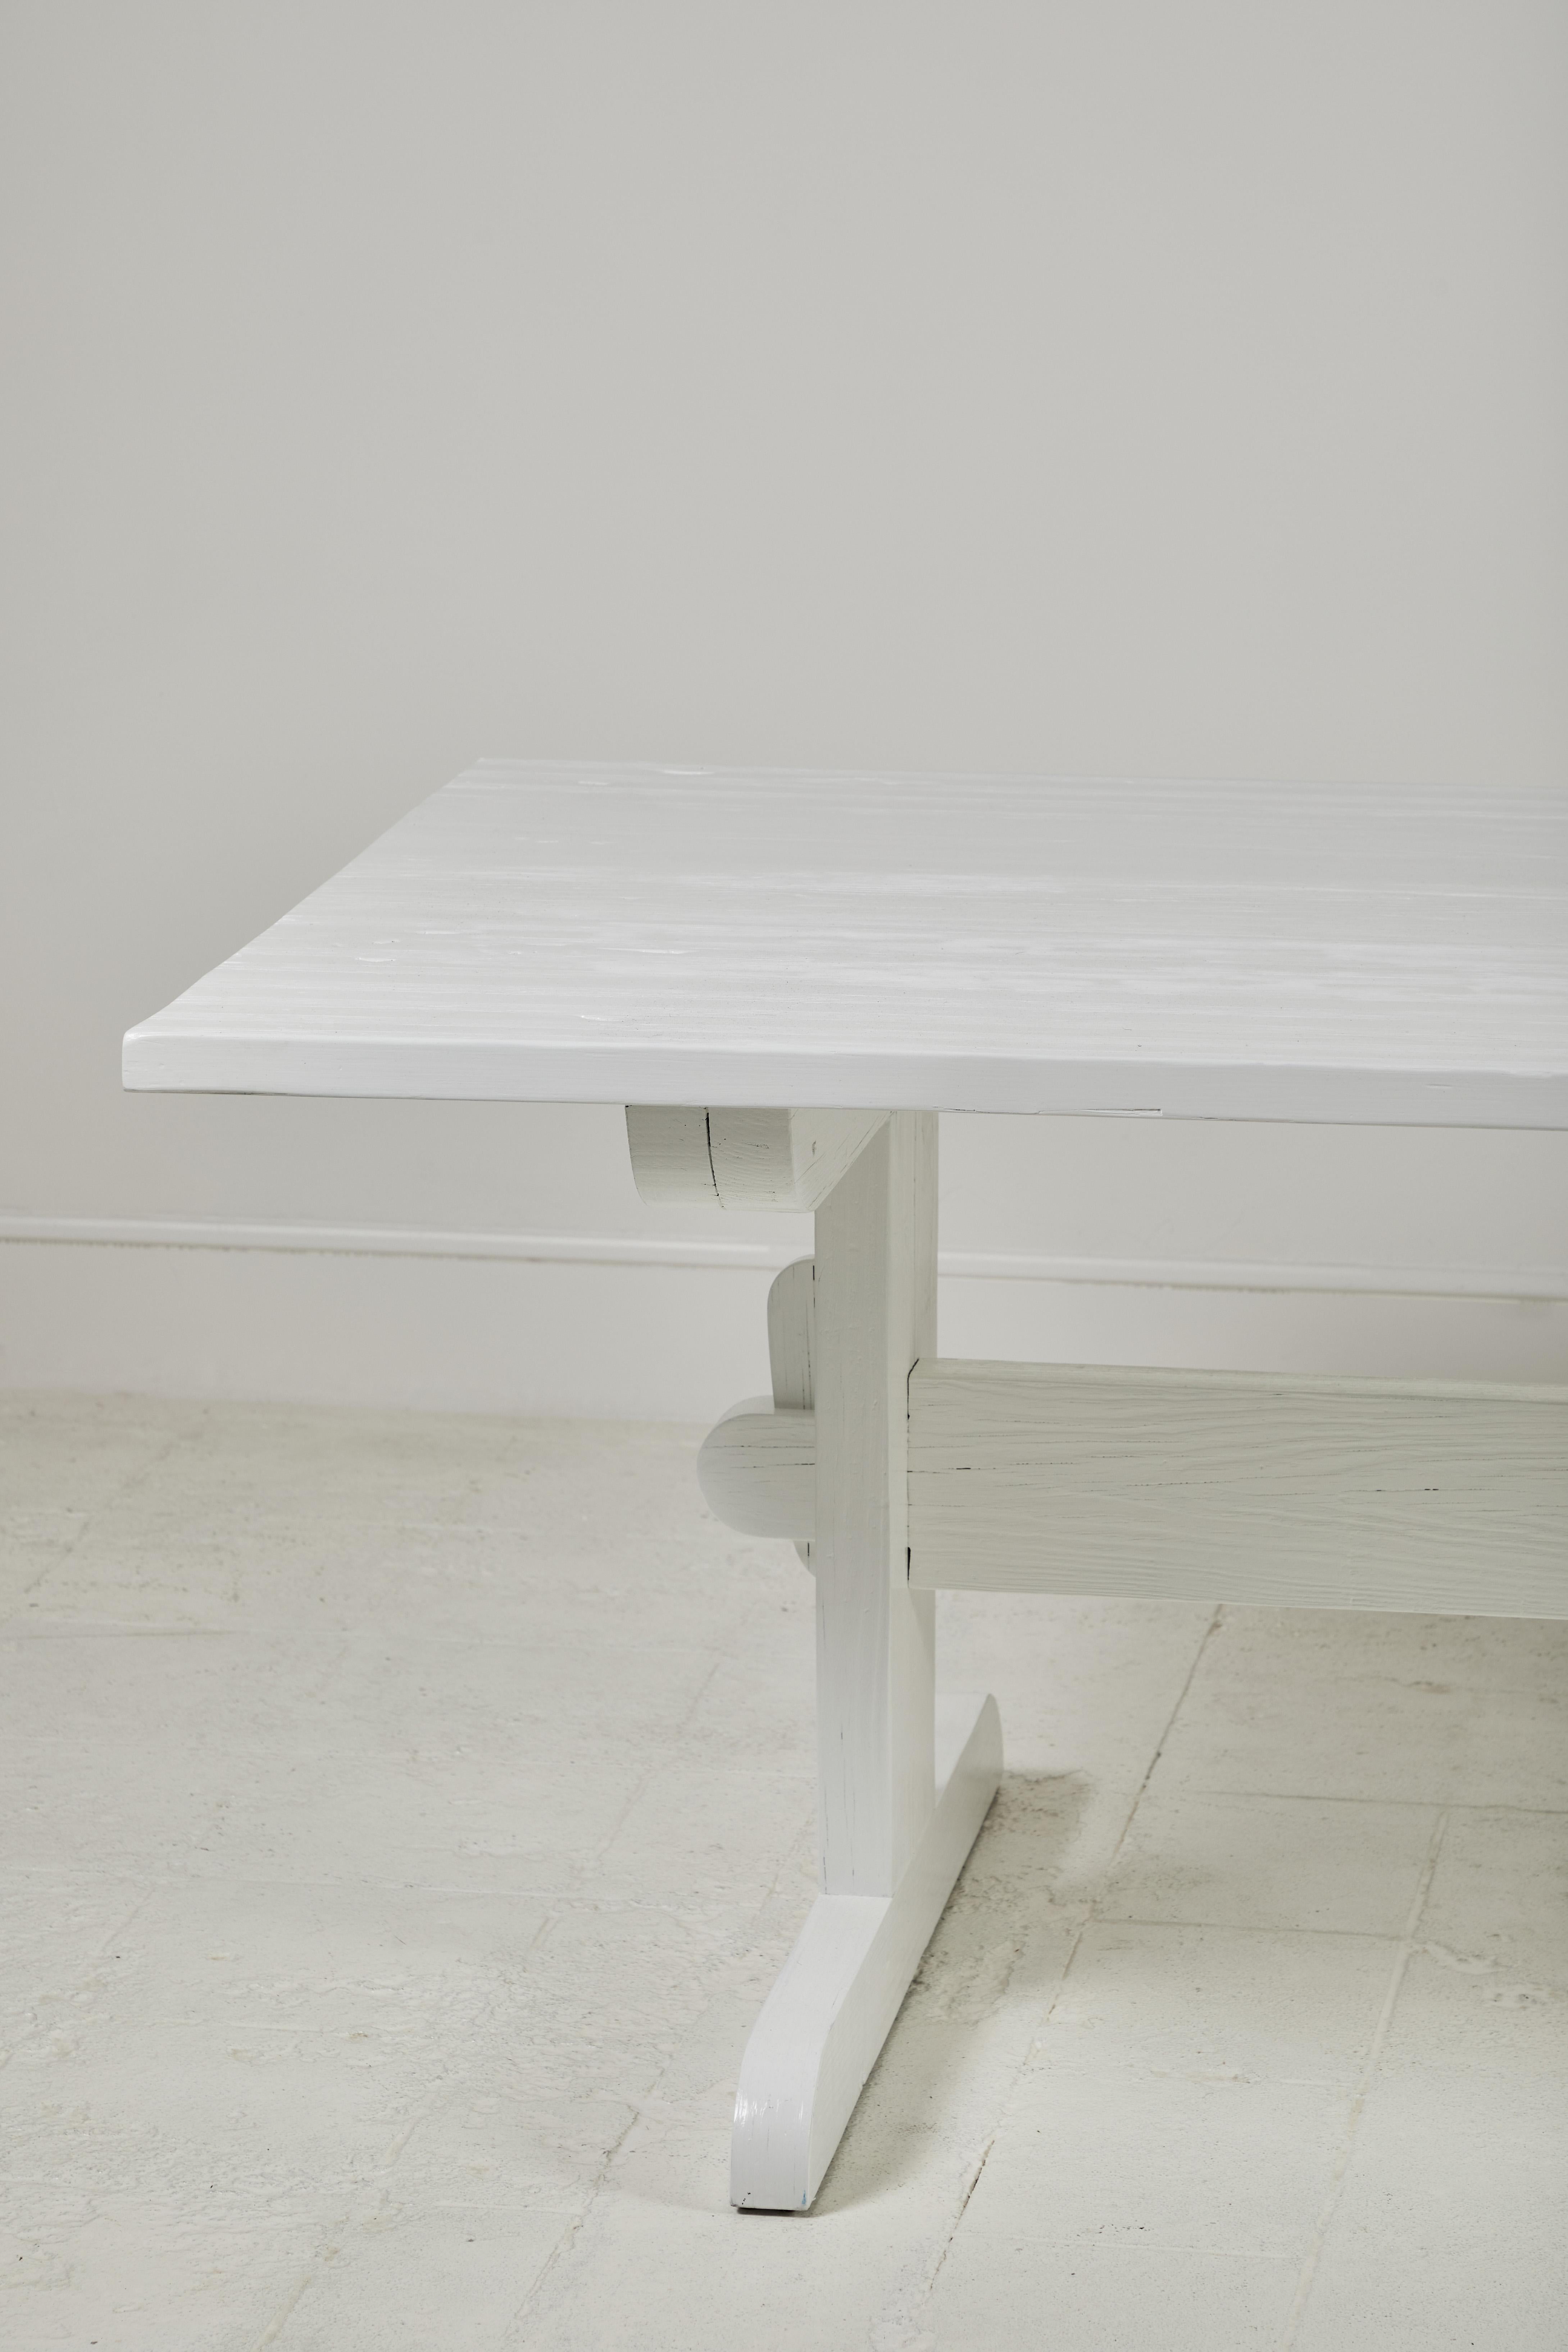 Nickey Kehoe collection white painted trestle dining table:

Beautiful handmade dining table utilizing wide-plank reclaimed yellow pine. The rectangular shape with trestle base boasts both pragmatism and elegance. Natural sun-bleached finish